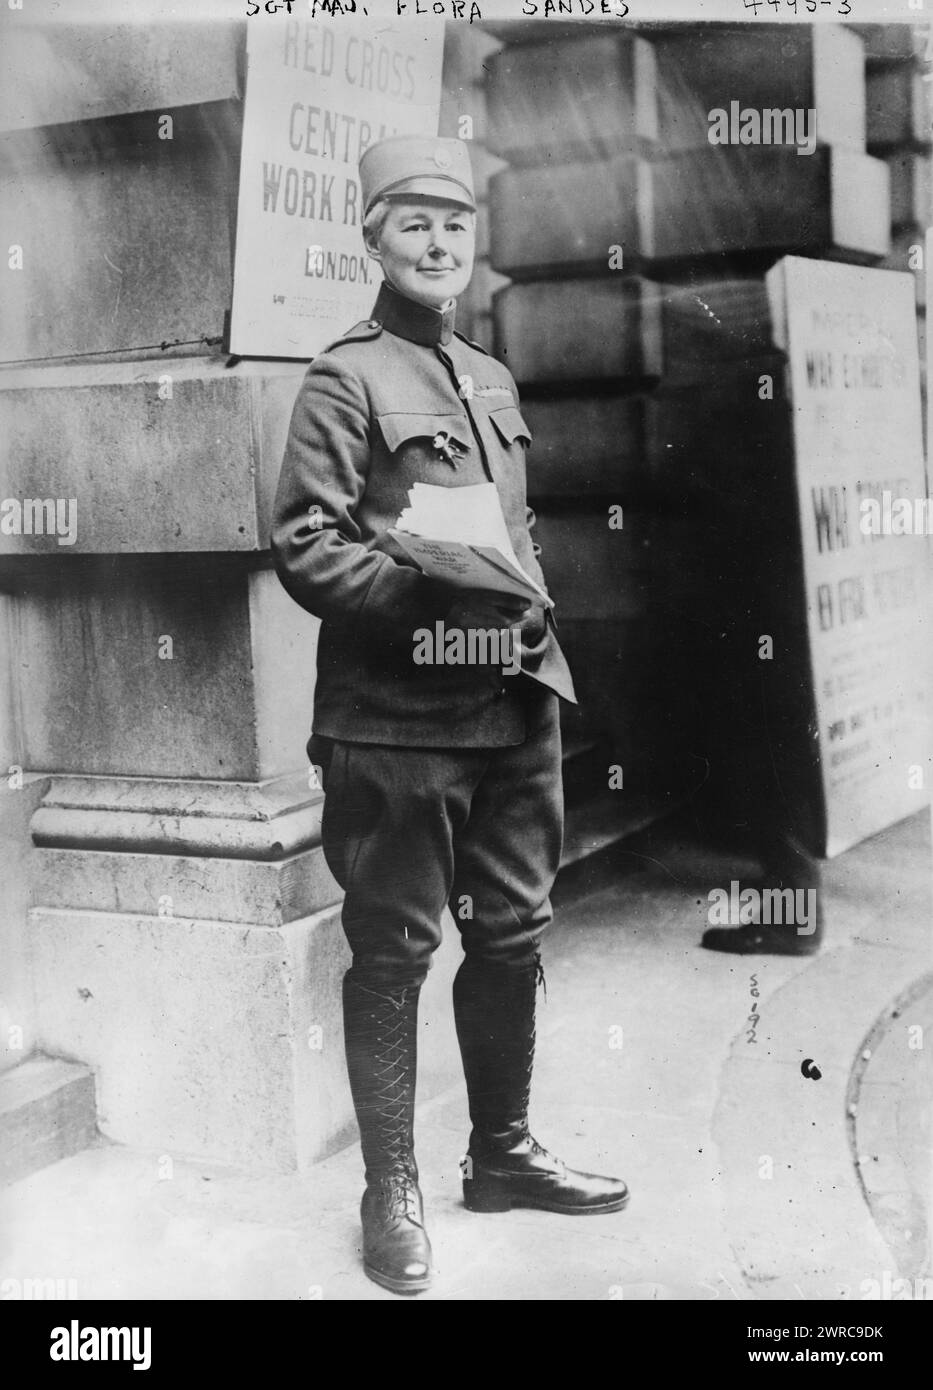 Sgt. Maj. Flora Sandes, between ca. 1915 and ca. 1920, Glass negatives, 1 negative: glass Stock Photo